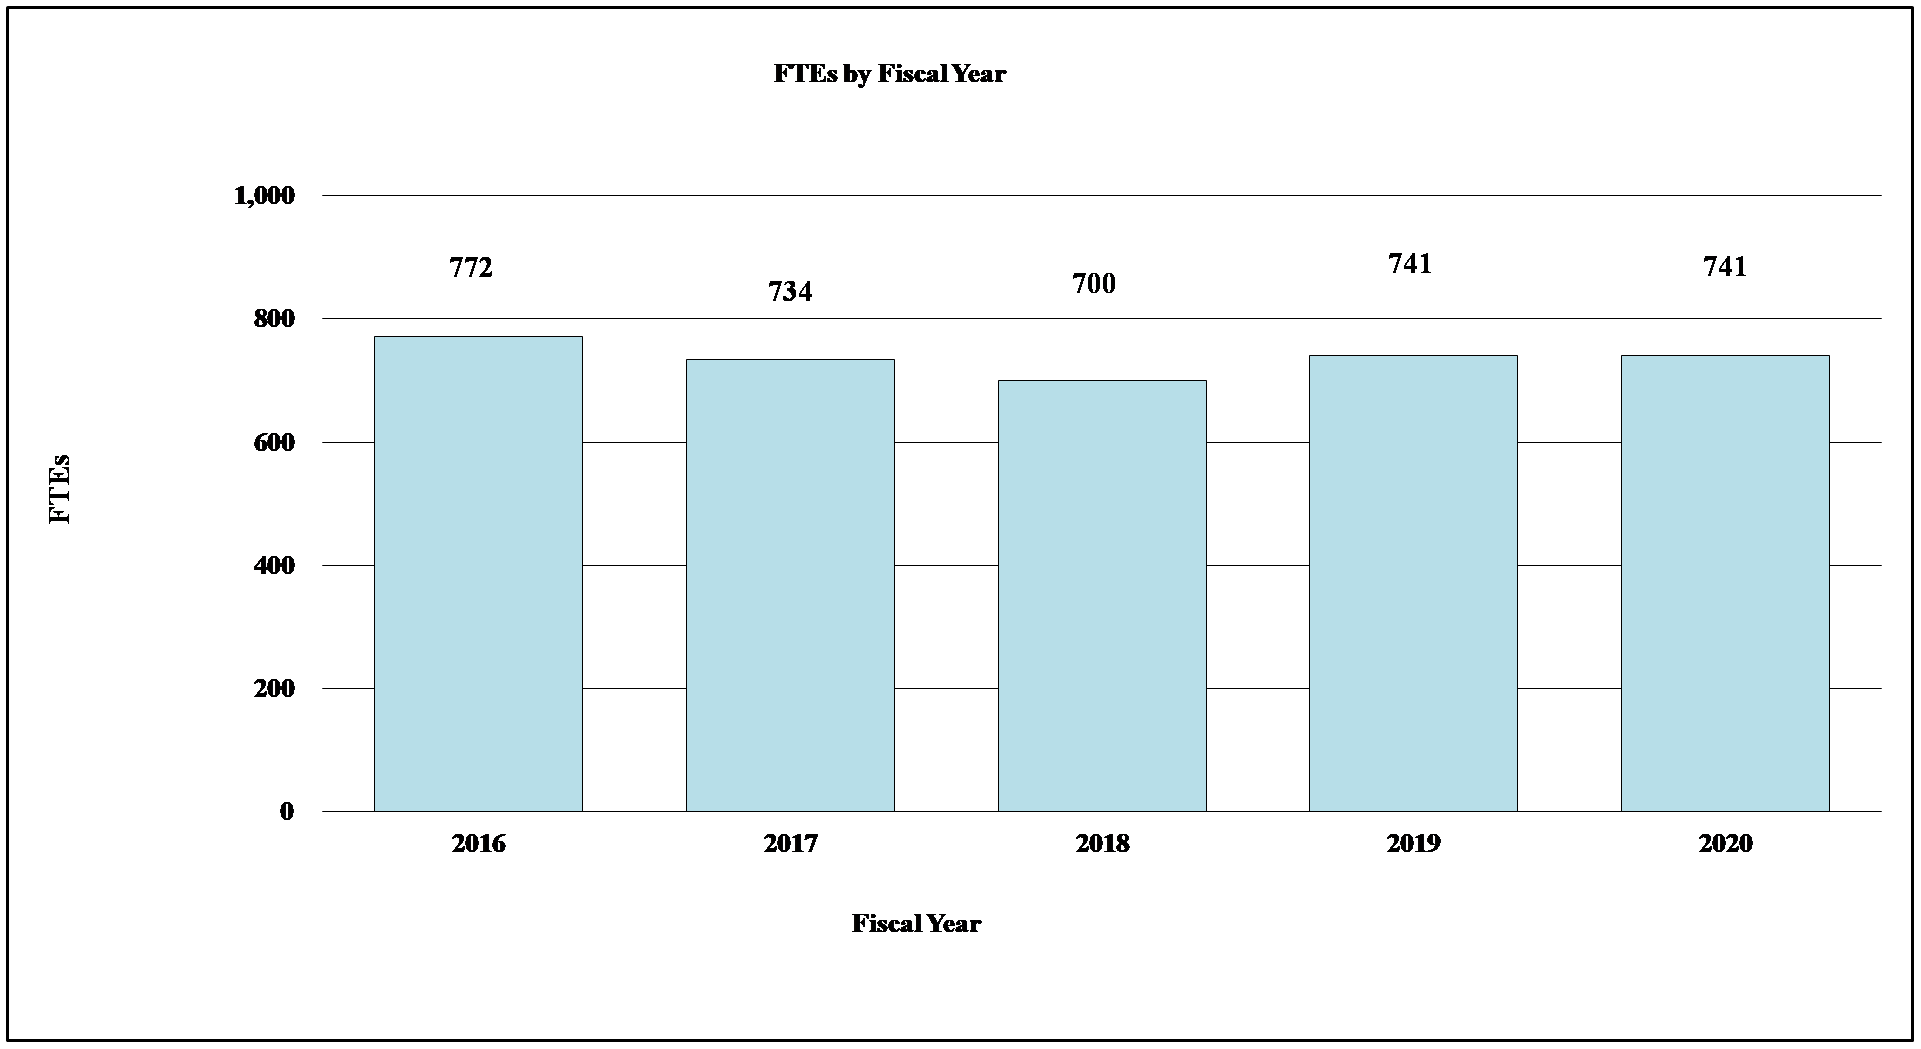 FTEs by Fiscal Year for 2016 through 2020